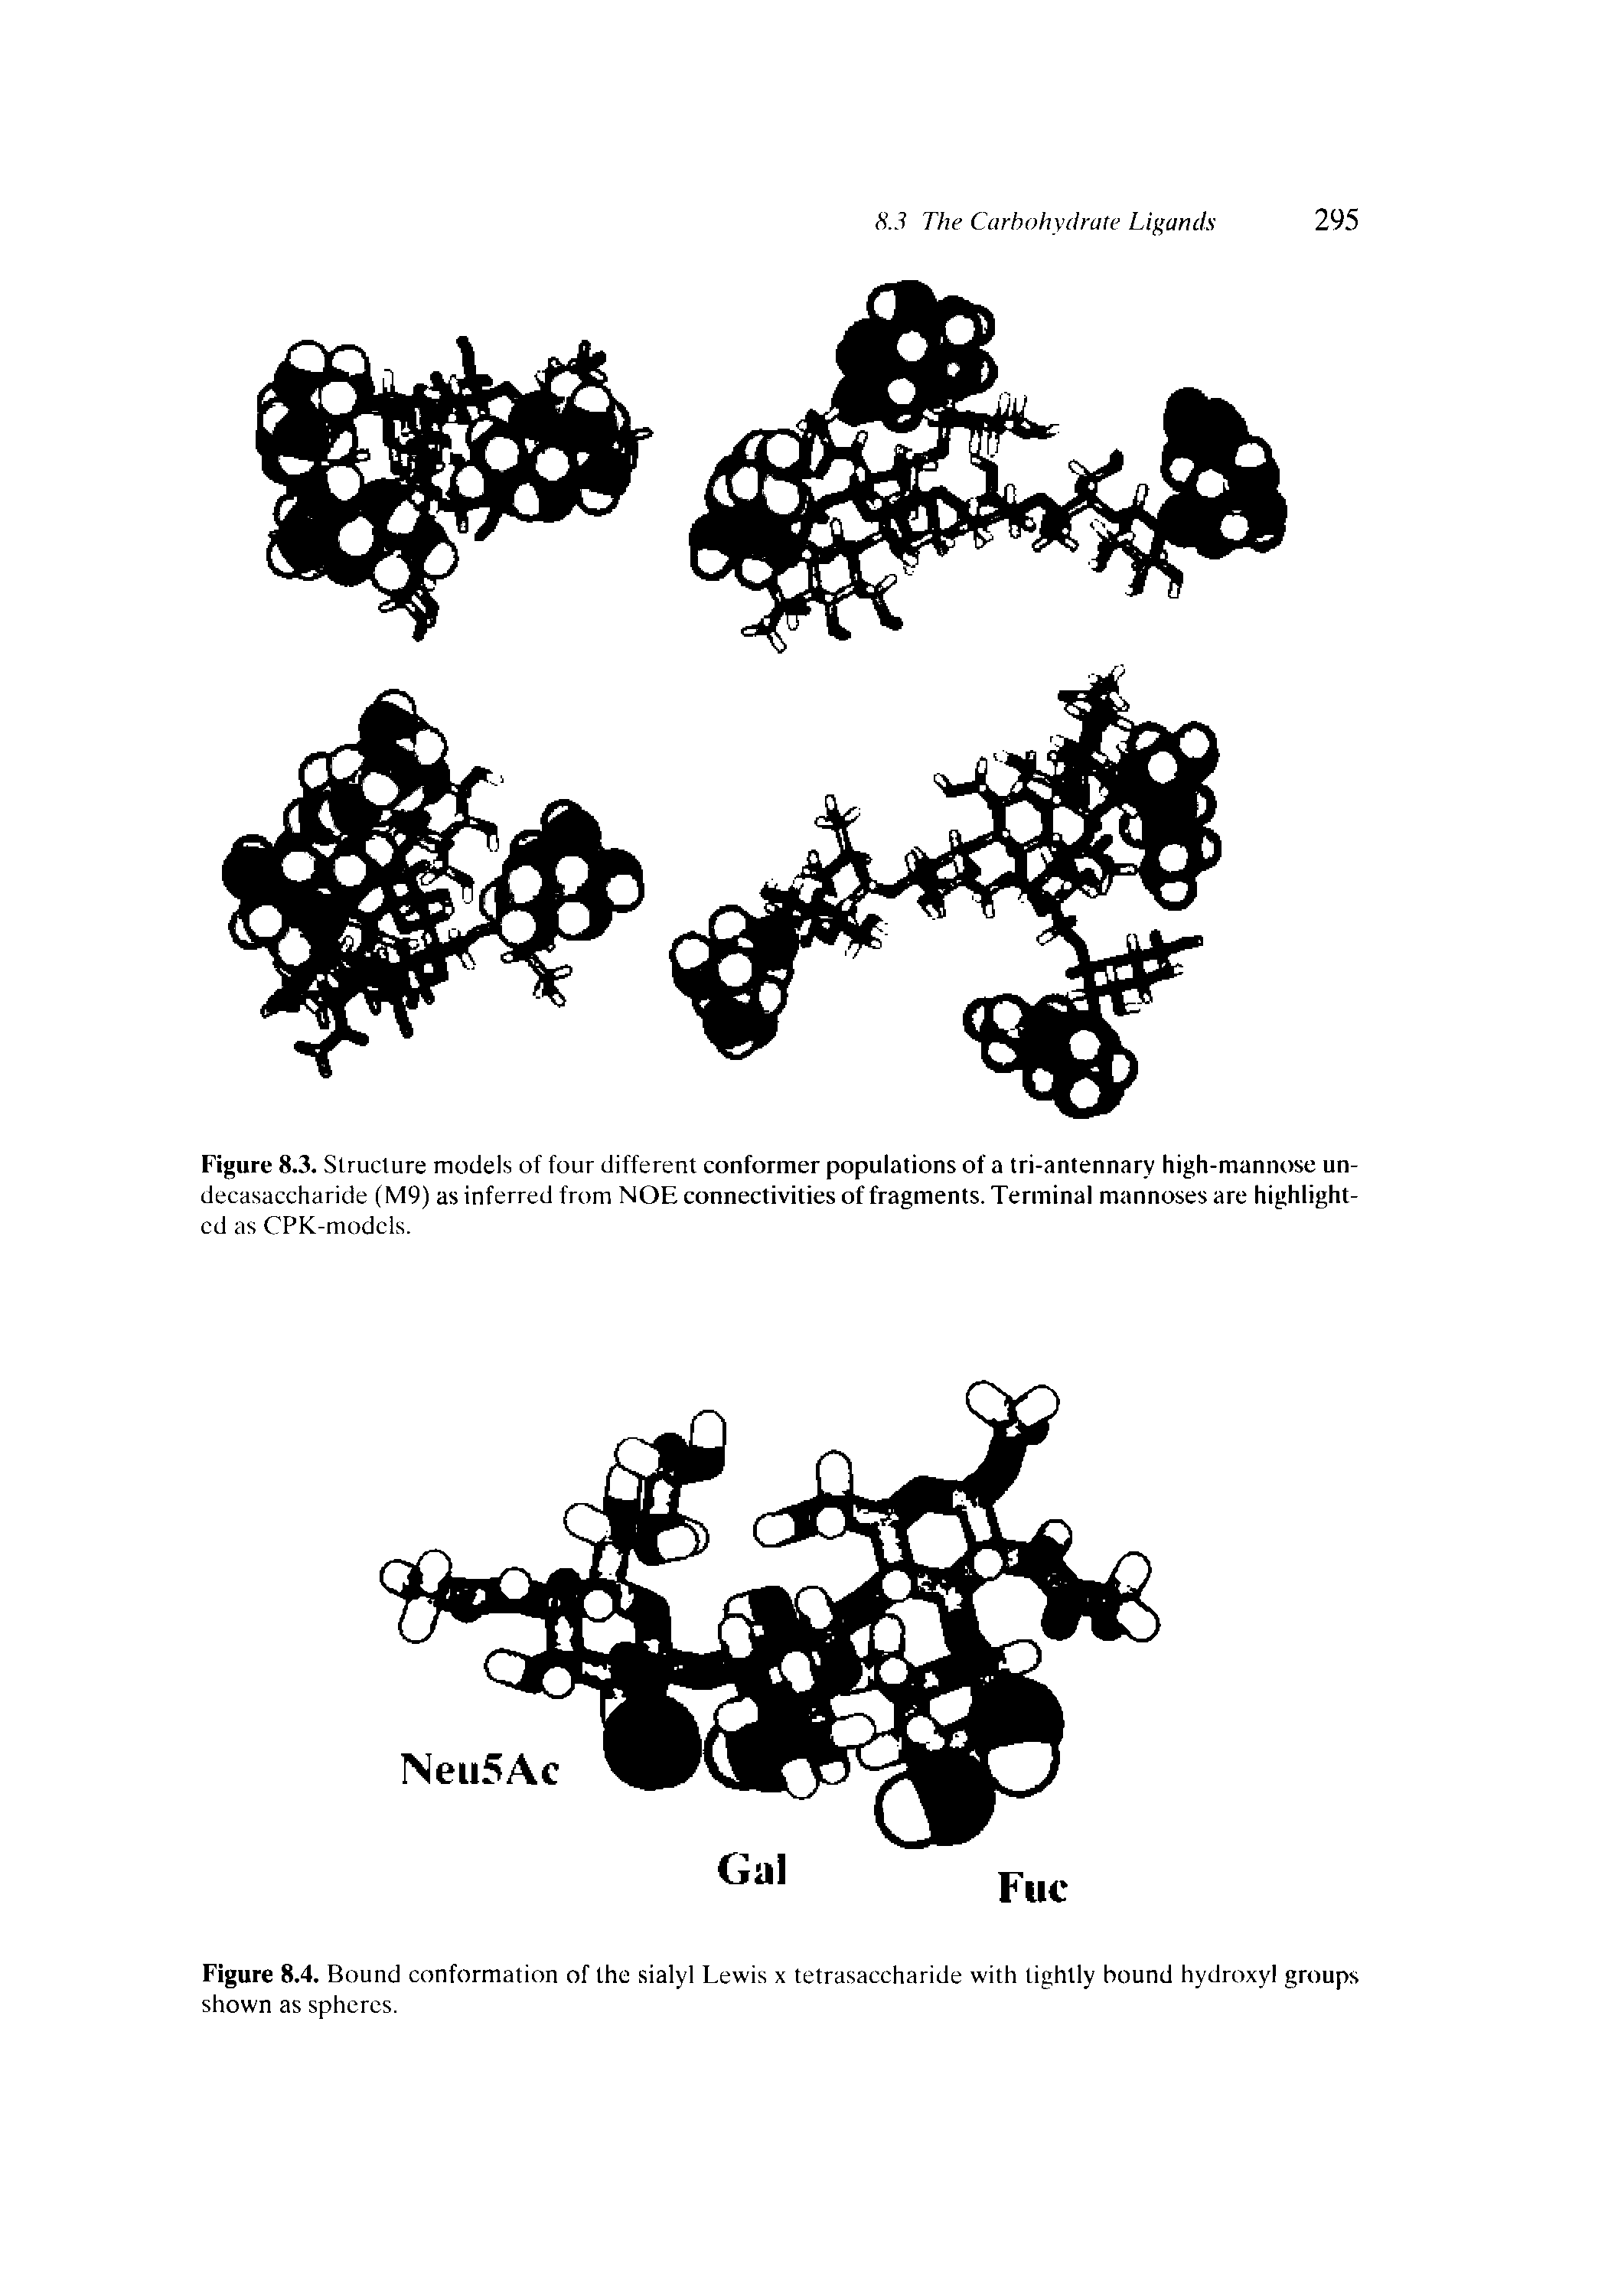 Figure 8.4. Bound conformation of the sialyl Lewis x tetrasaccharide with lightly bound hydroxyl groups shown as spheres.